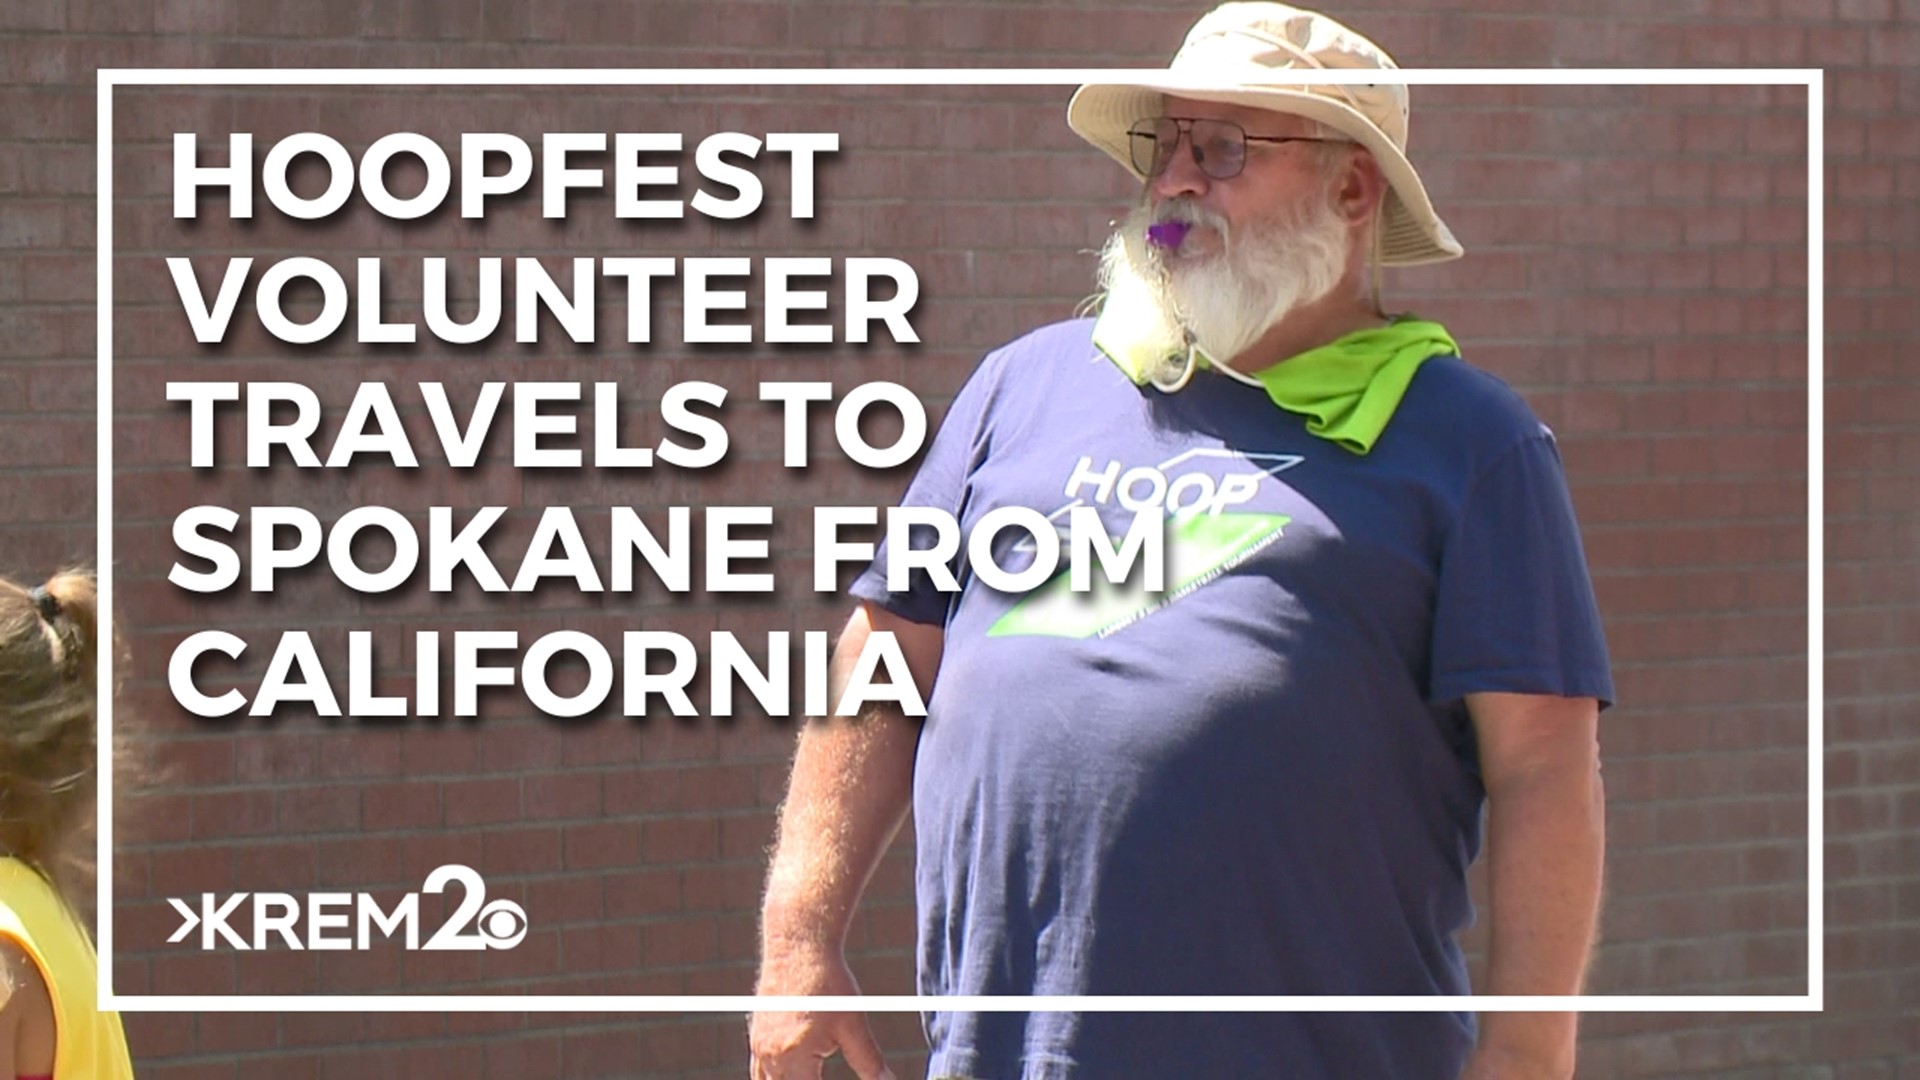 About 5 years ago, Carl Melhorn saw a story on KREM 2 where Hoopfest officials were asking for volunteers. After some convincing from his wife, he decided to try it.